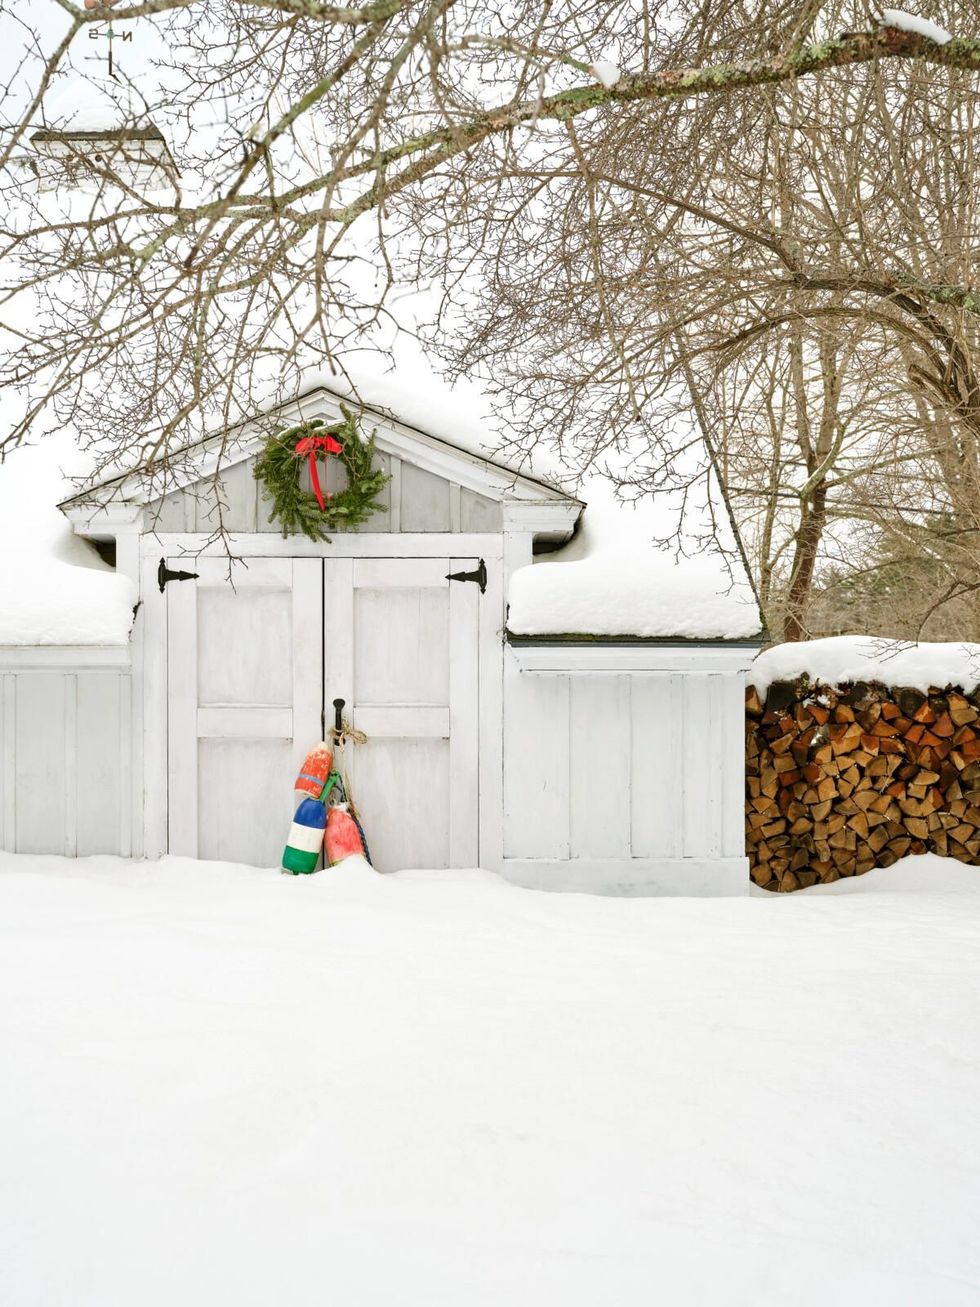 White barn with red and green buoys tied to the door in the snow